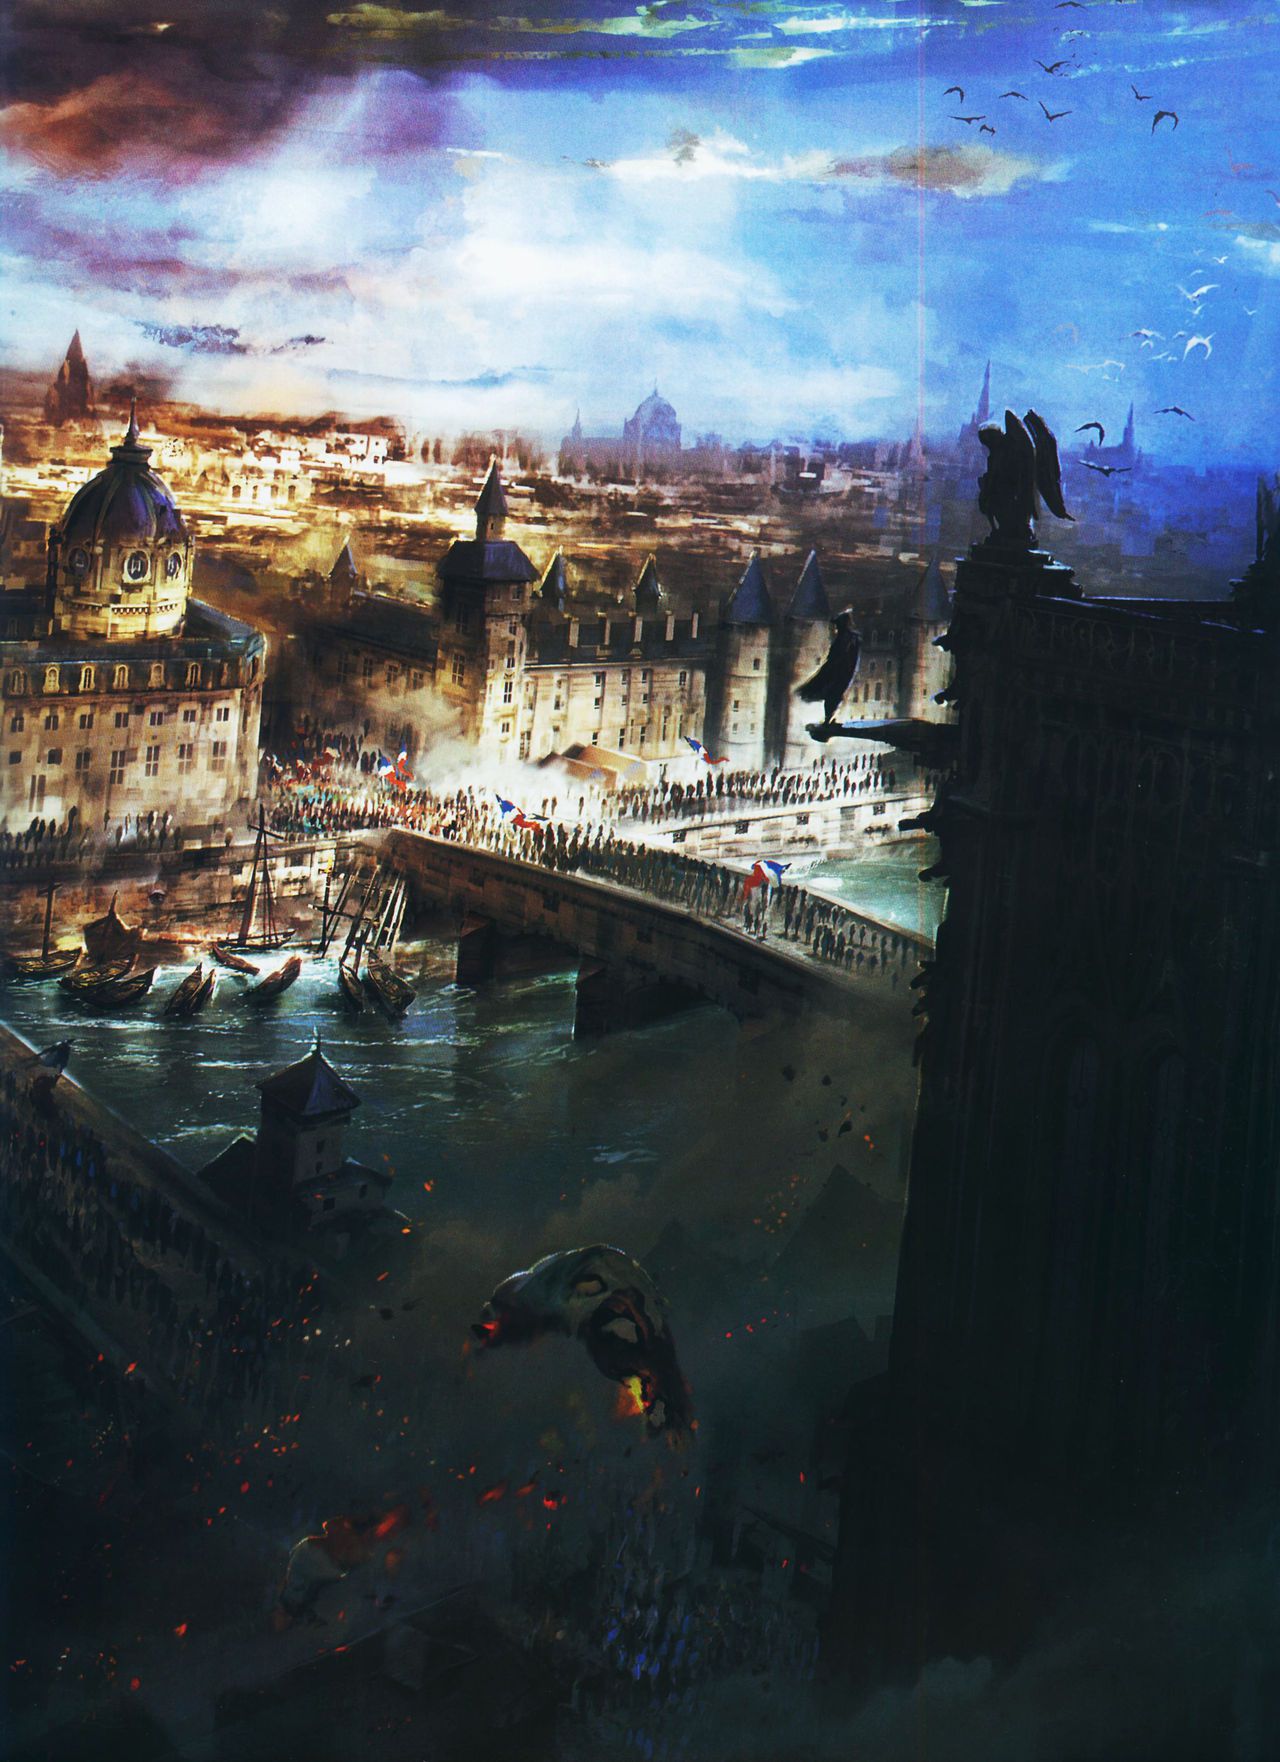 The Art of Assassin's Creed Unity (2014) 75